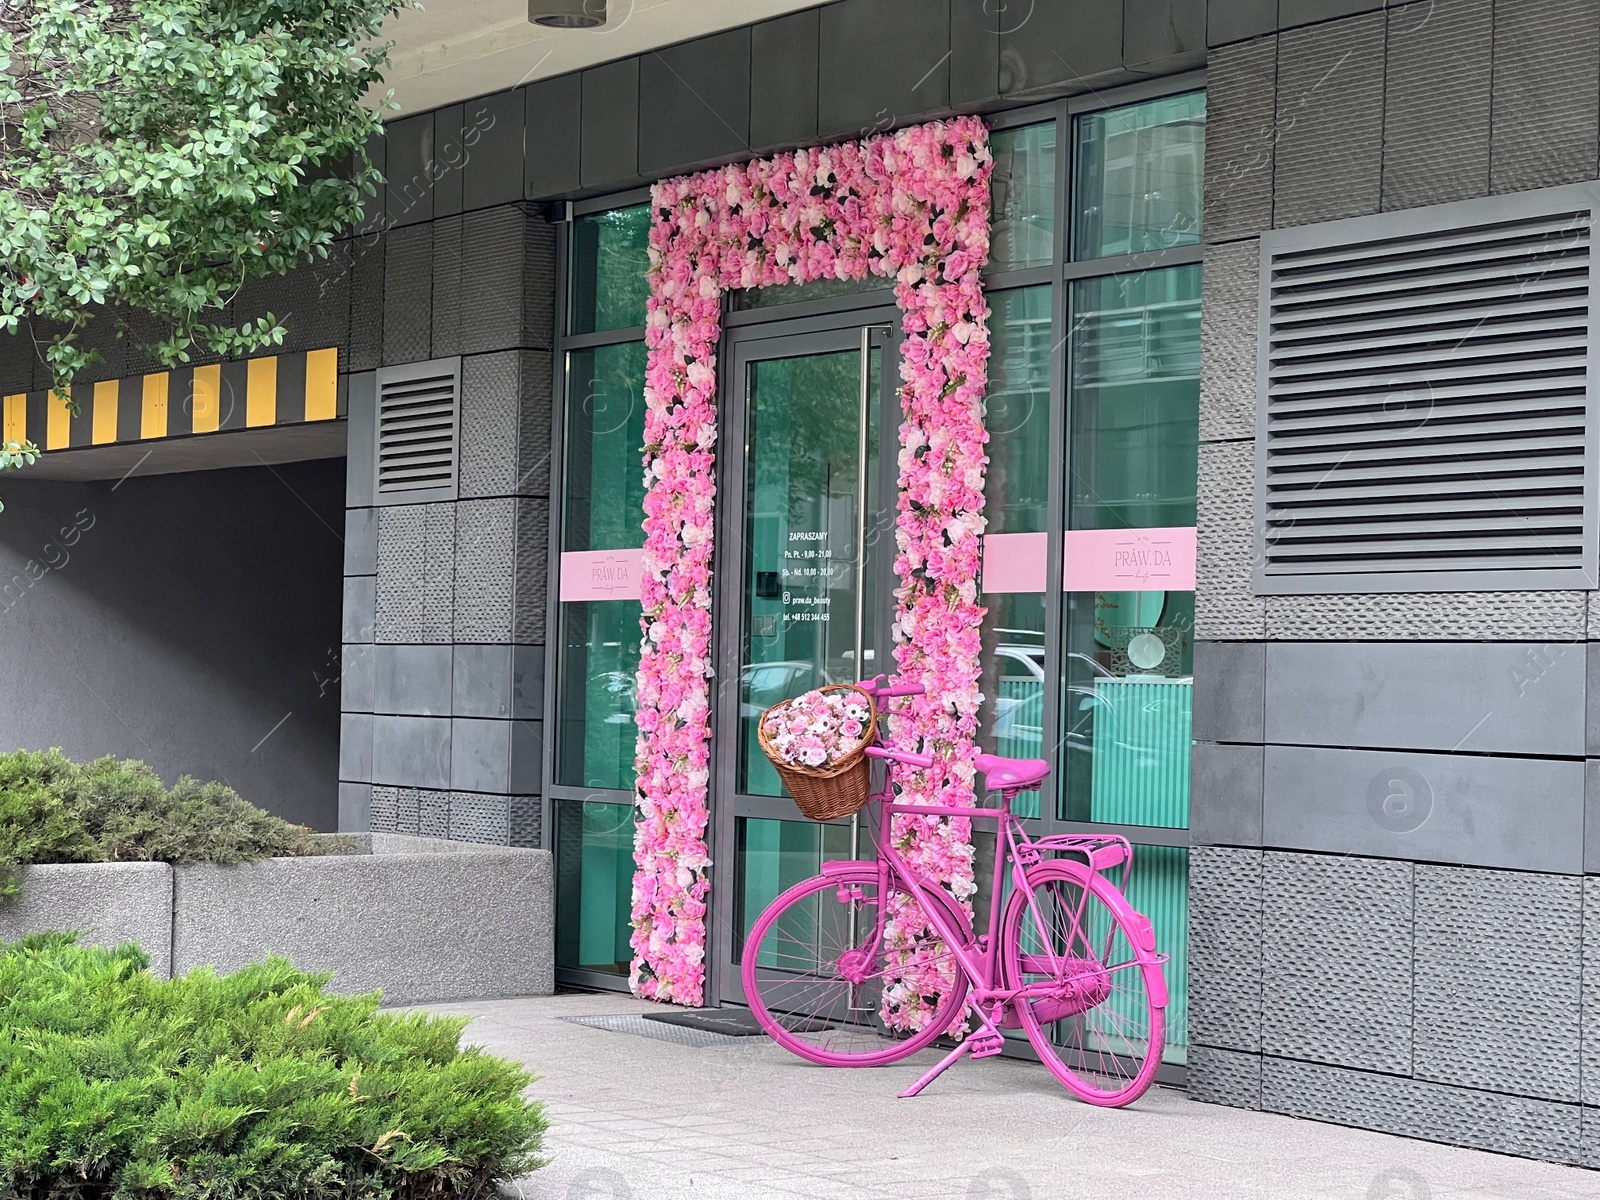 Photo of WARSAW, POLAND - JULY 13, 2022: Entrance of building decorated beautiful flowers and pink bicycle